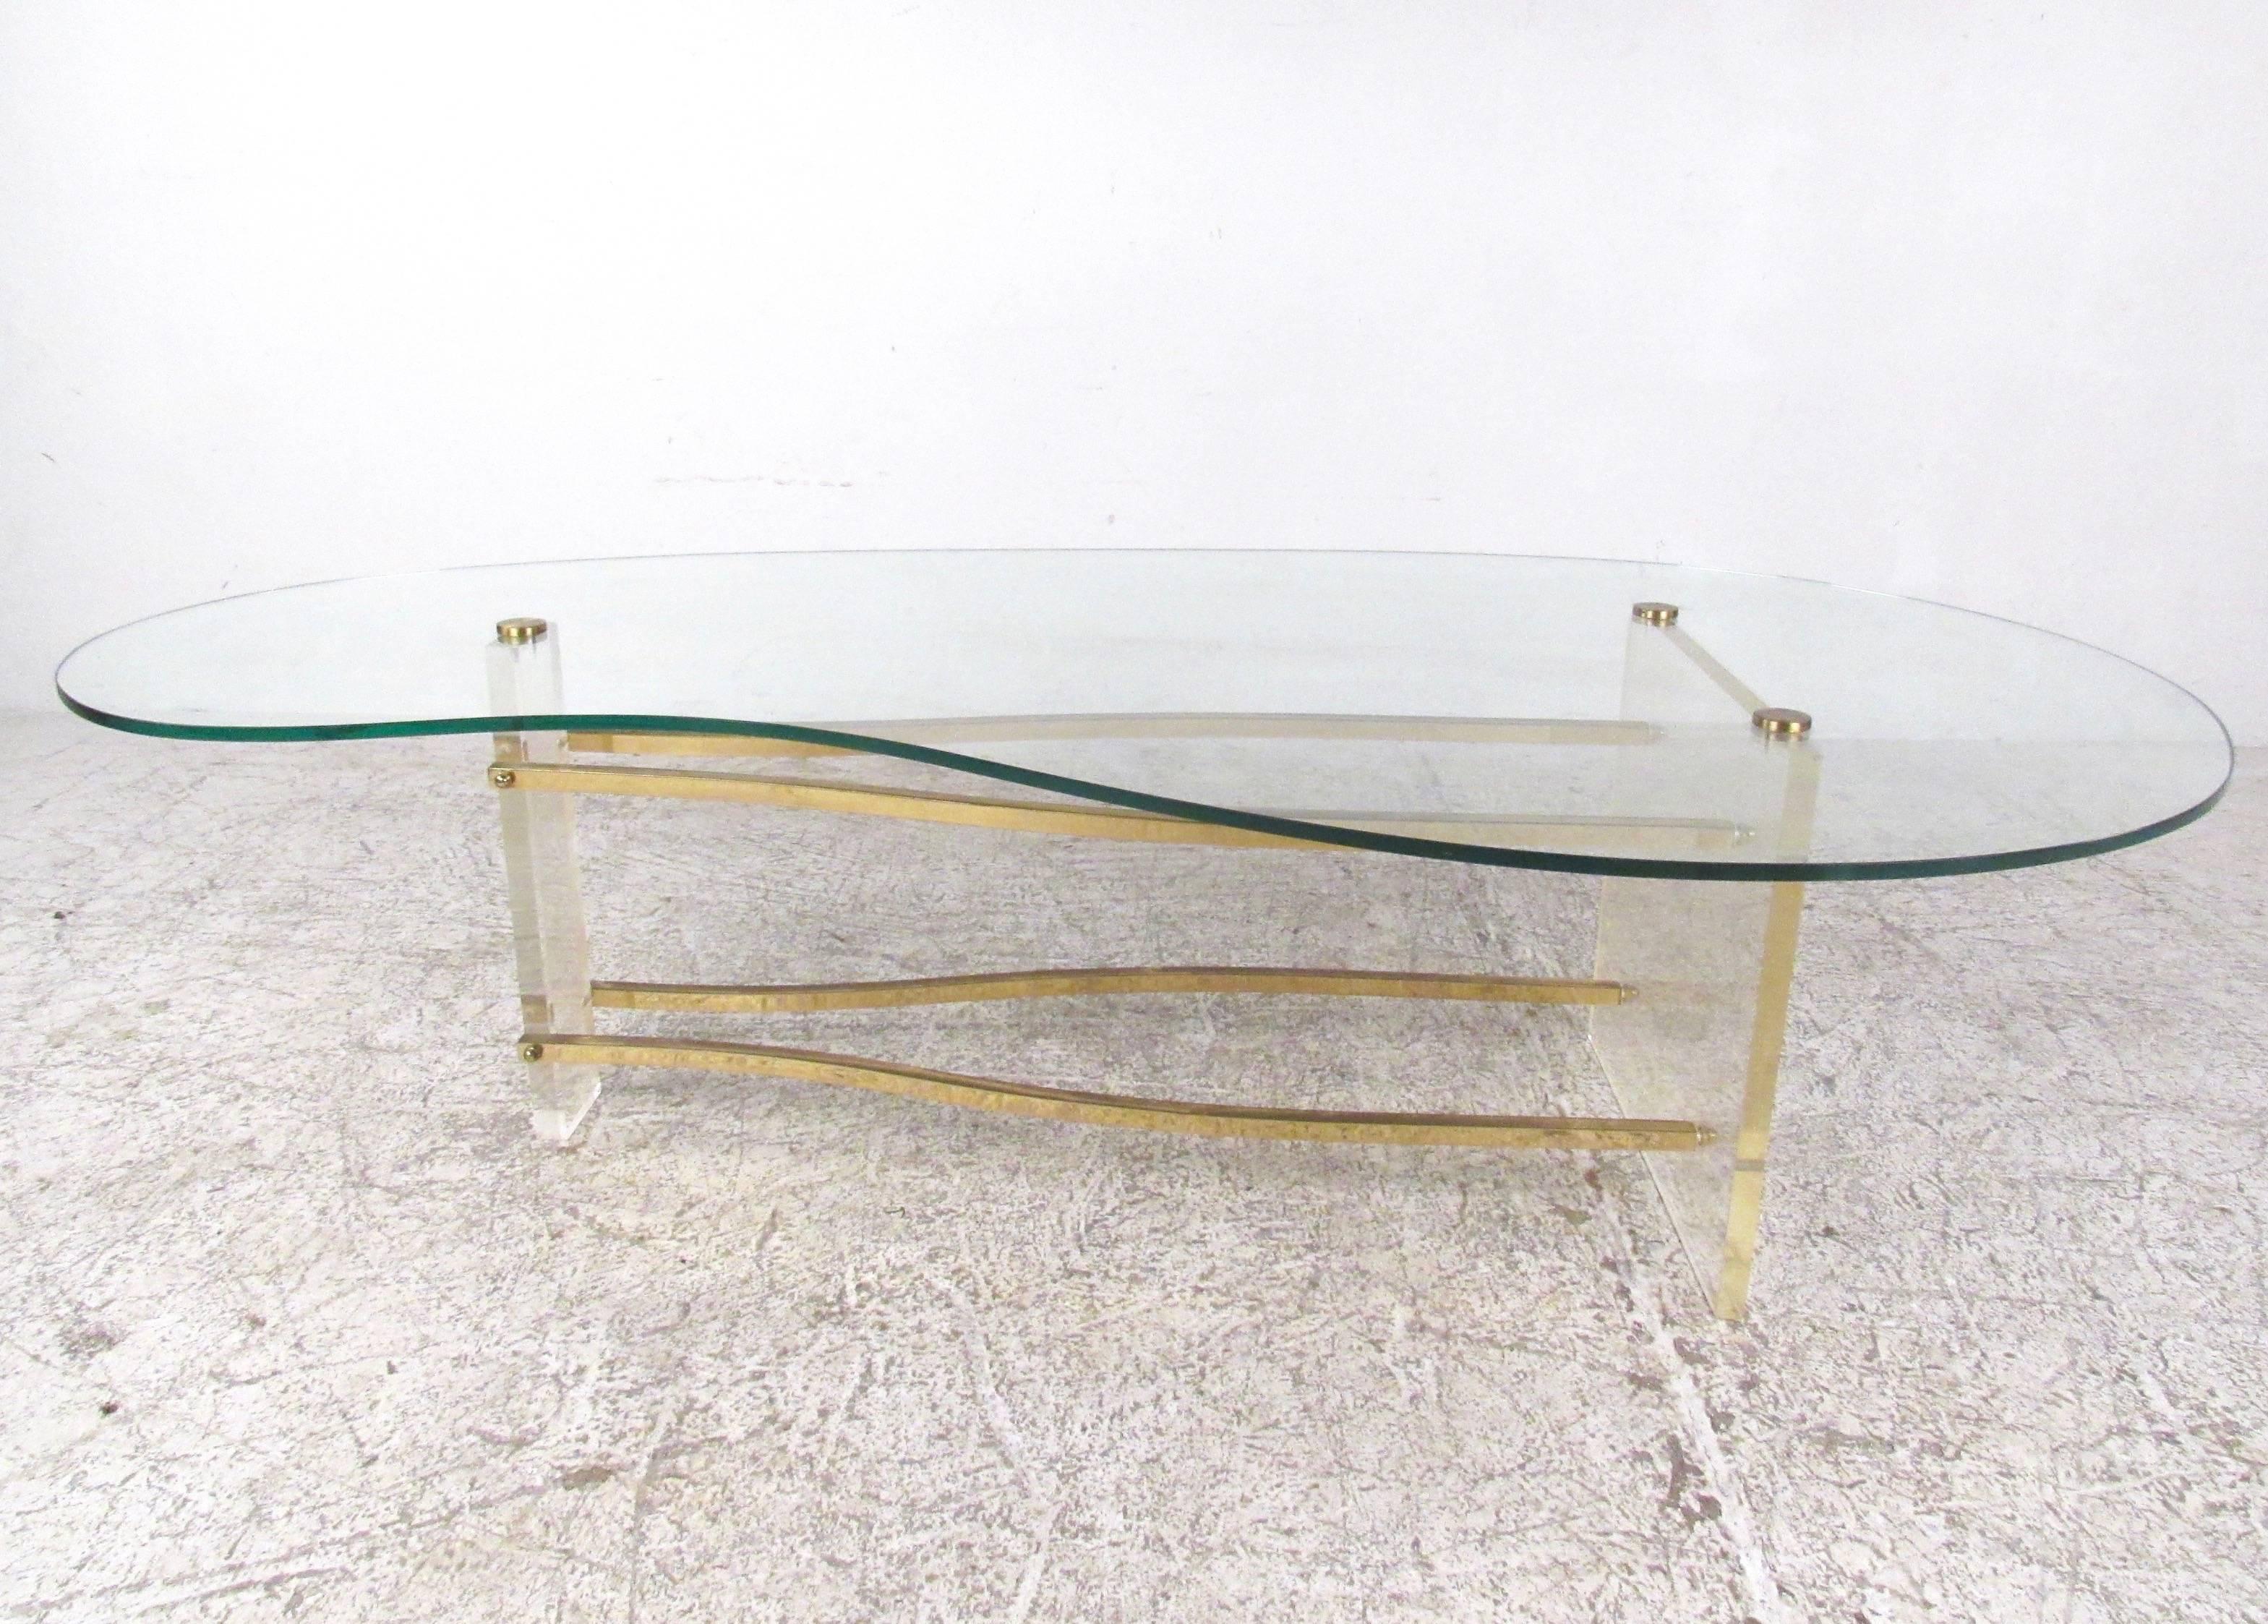 This stunning vintage coffee table features a kidney shaped glass top mounted on a brass and Lucite base. This Charles Hollis Jones design features unique Mid-Century Modern style and makes an elegant addition to any home or office. Please confirm